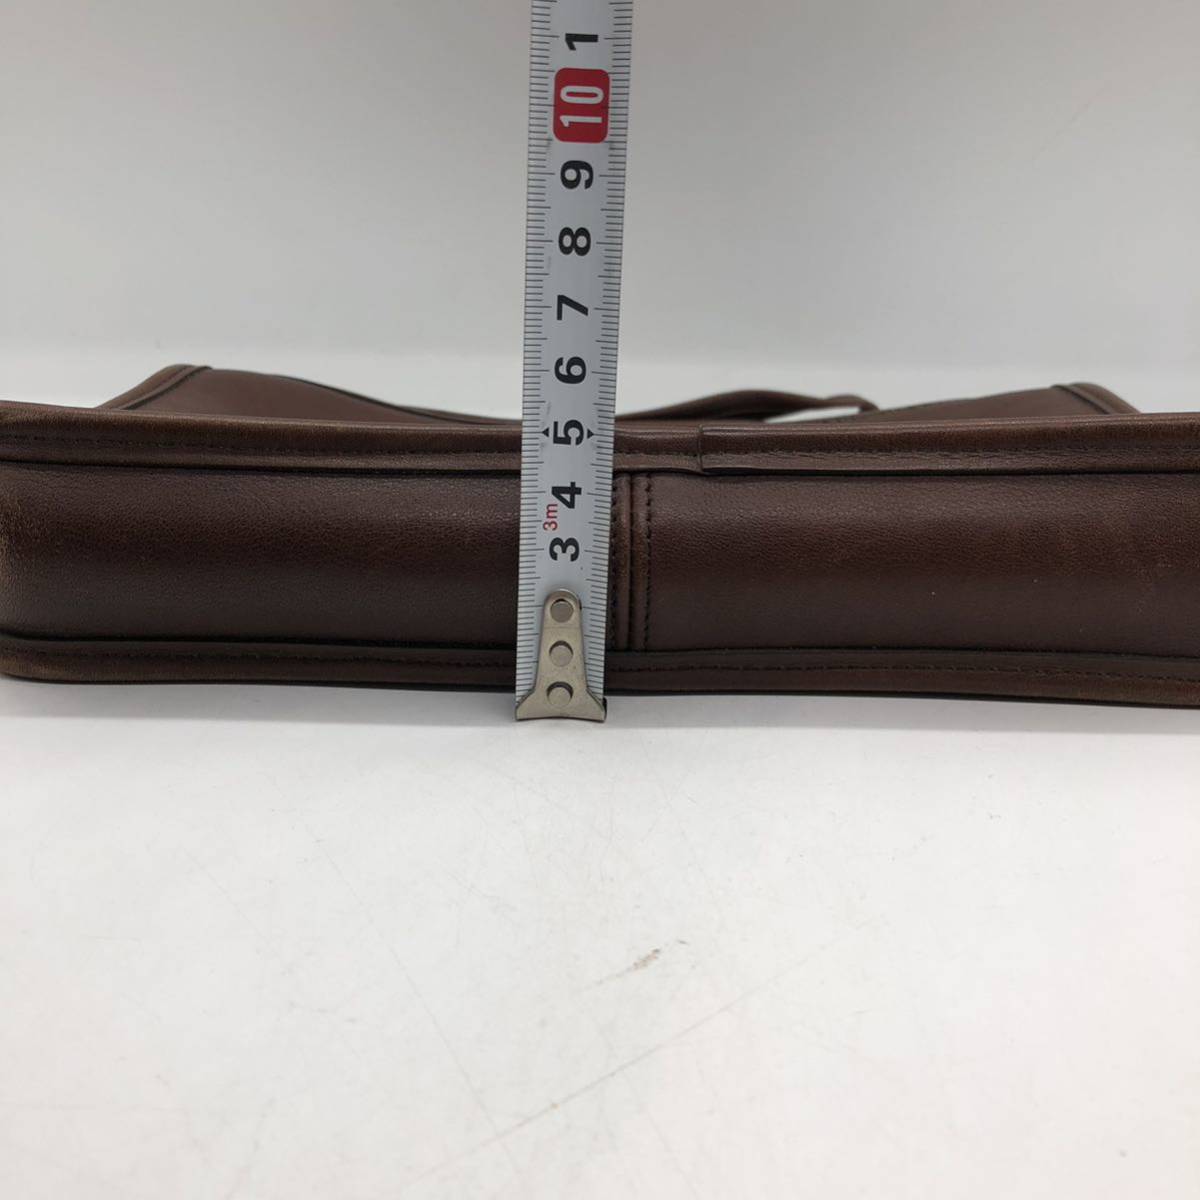 【Free】coach leather porch brownコーチ レザーポーチ オールドコーチ ブラウンT4_画像9